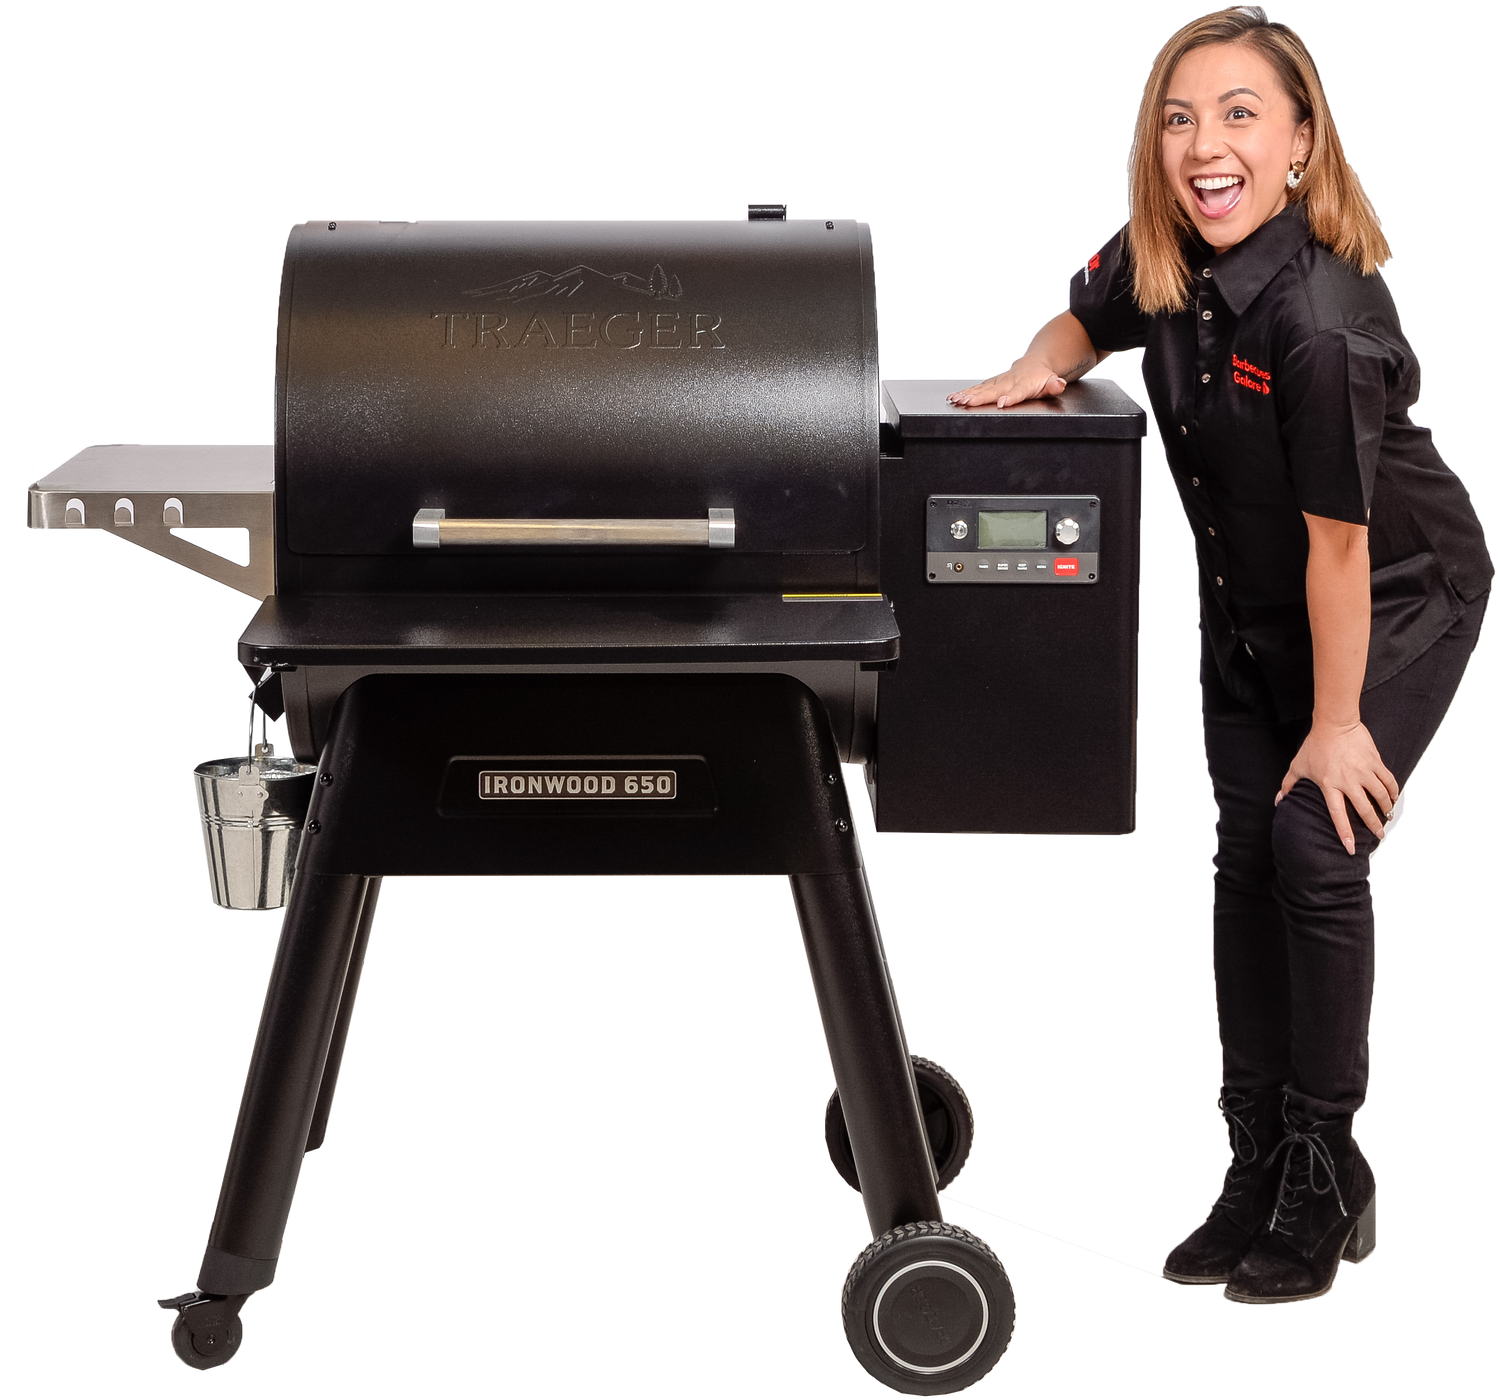 Traeger Ironwood 650 Pellet Grill | Pellet grills and smokers are where it’s at this summer | Barbecues Galore: Burlington, Oakville, Etobicoke & Calgary